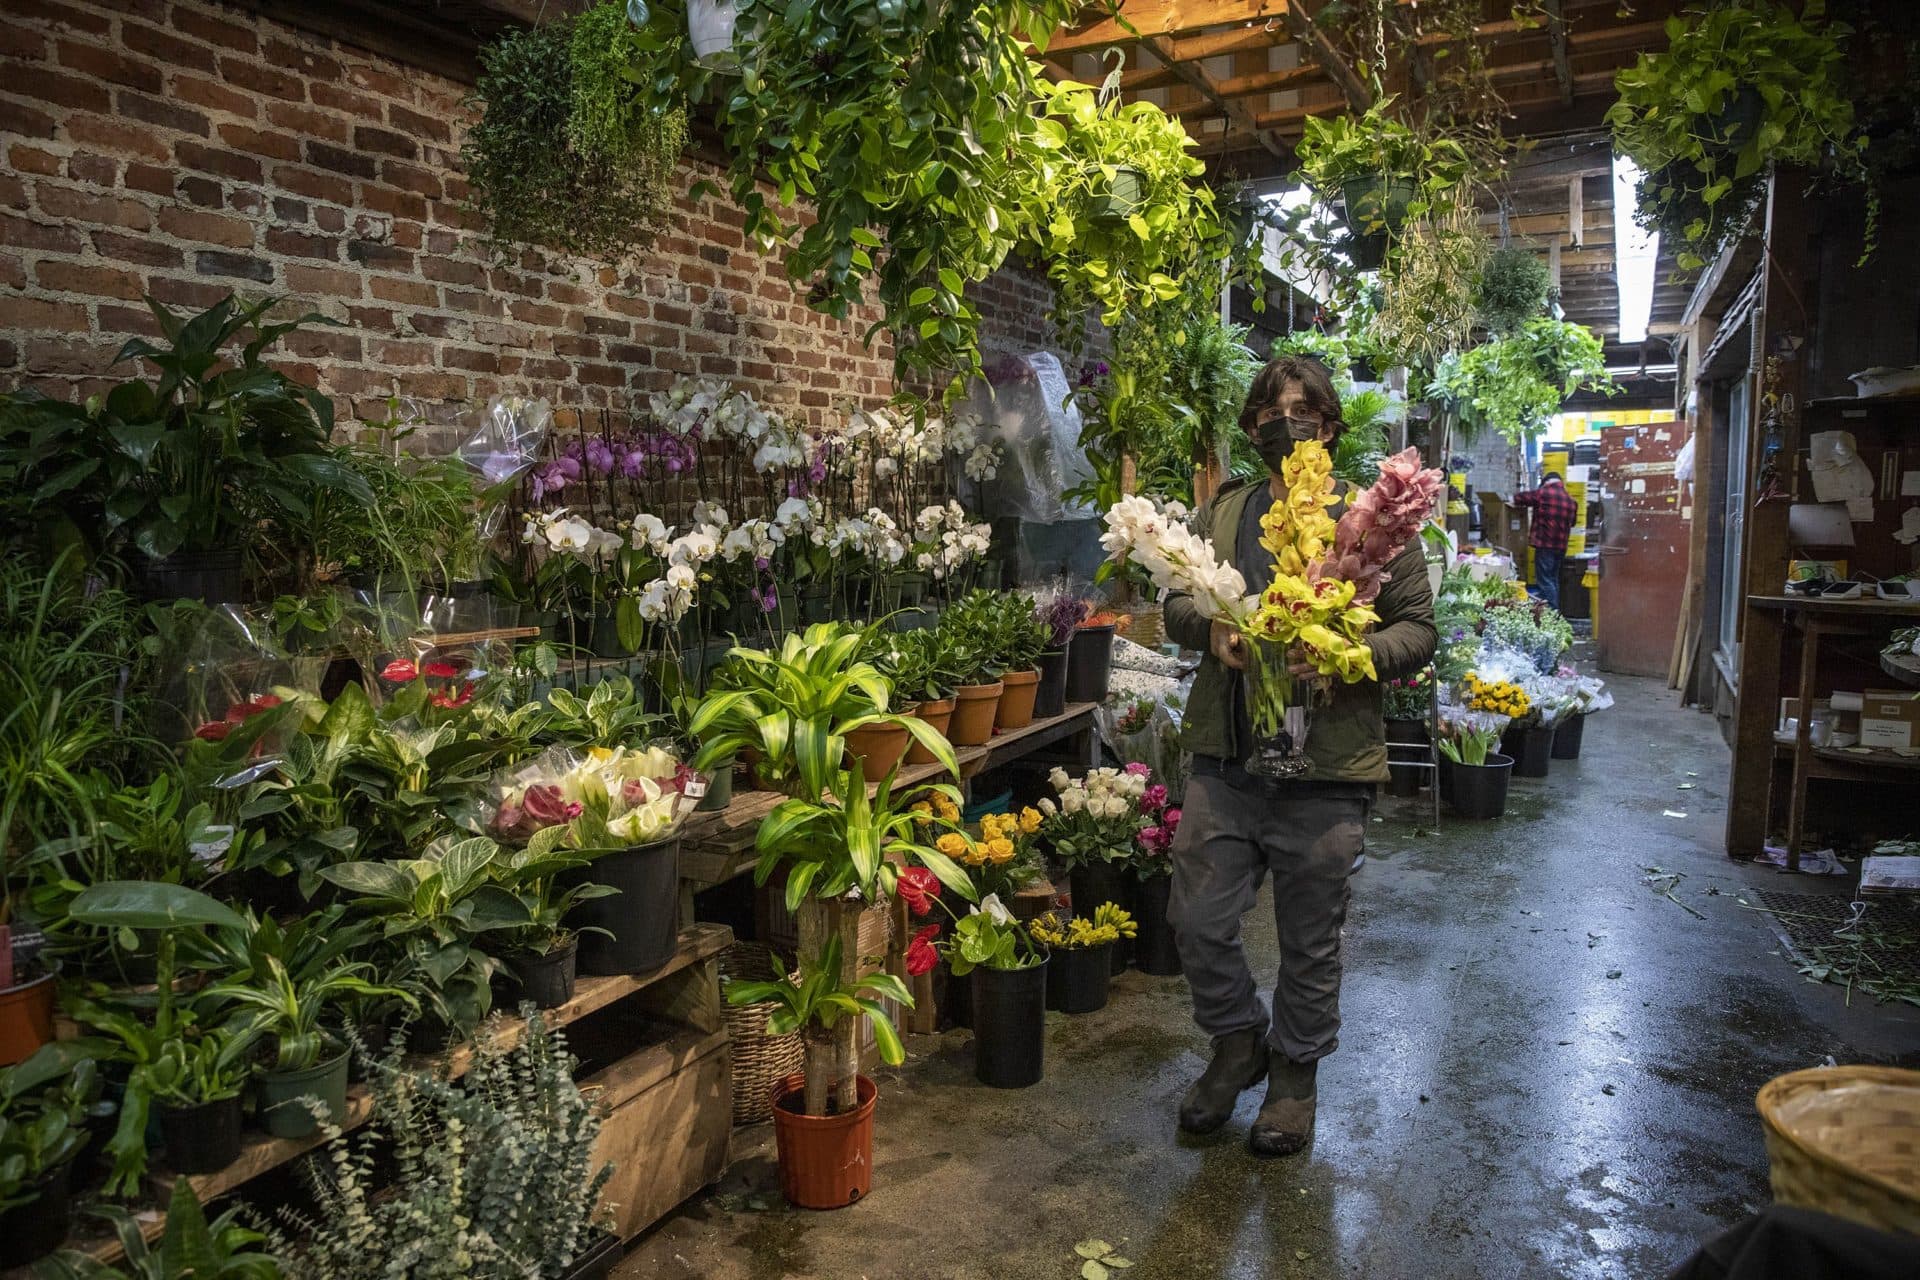 Brattle Square Florist will remain open, returning to ownership under the original family. (Robin Lubbock/WBUR)